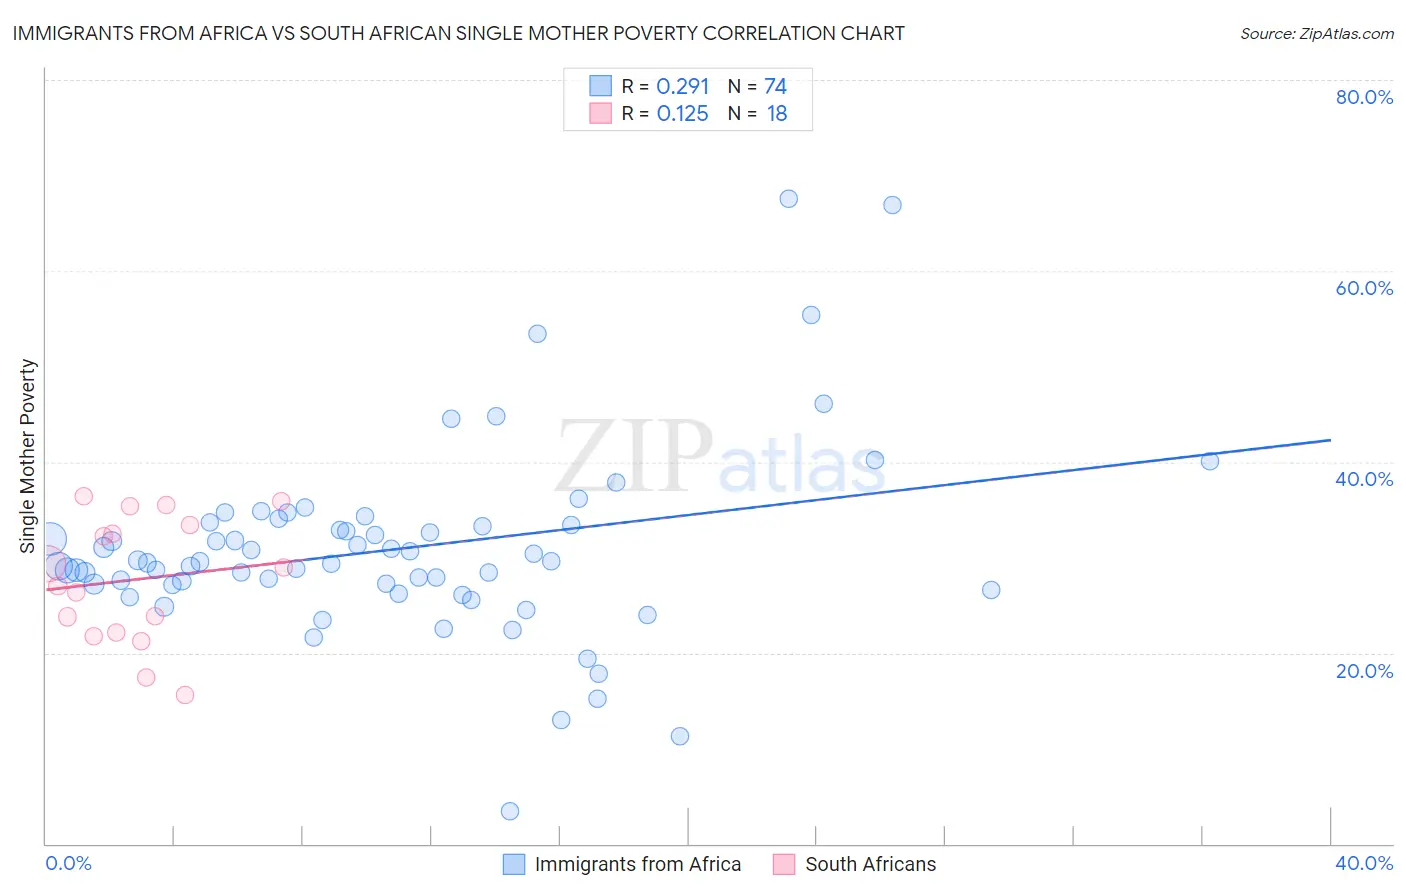 Immigrants from Africa vs South African Single Mother Poverty